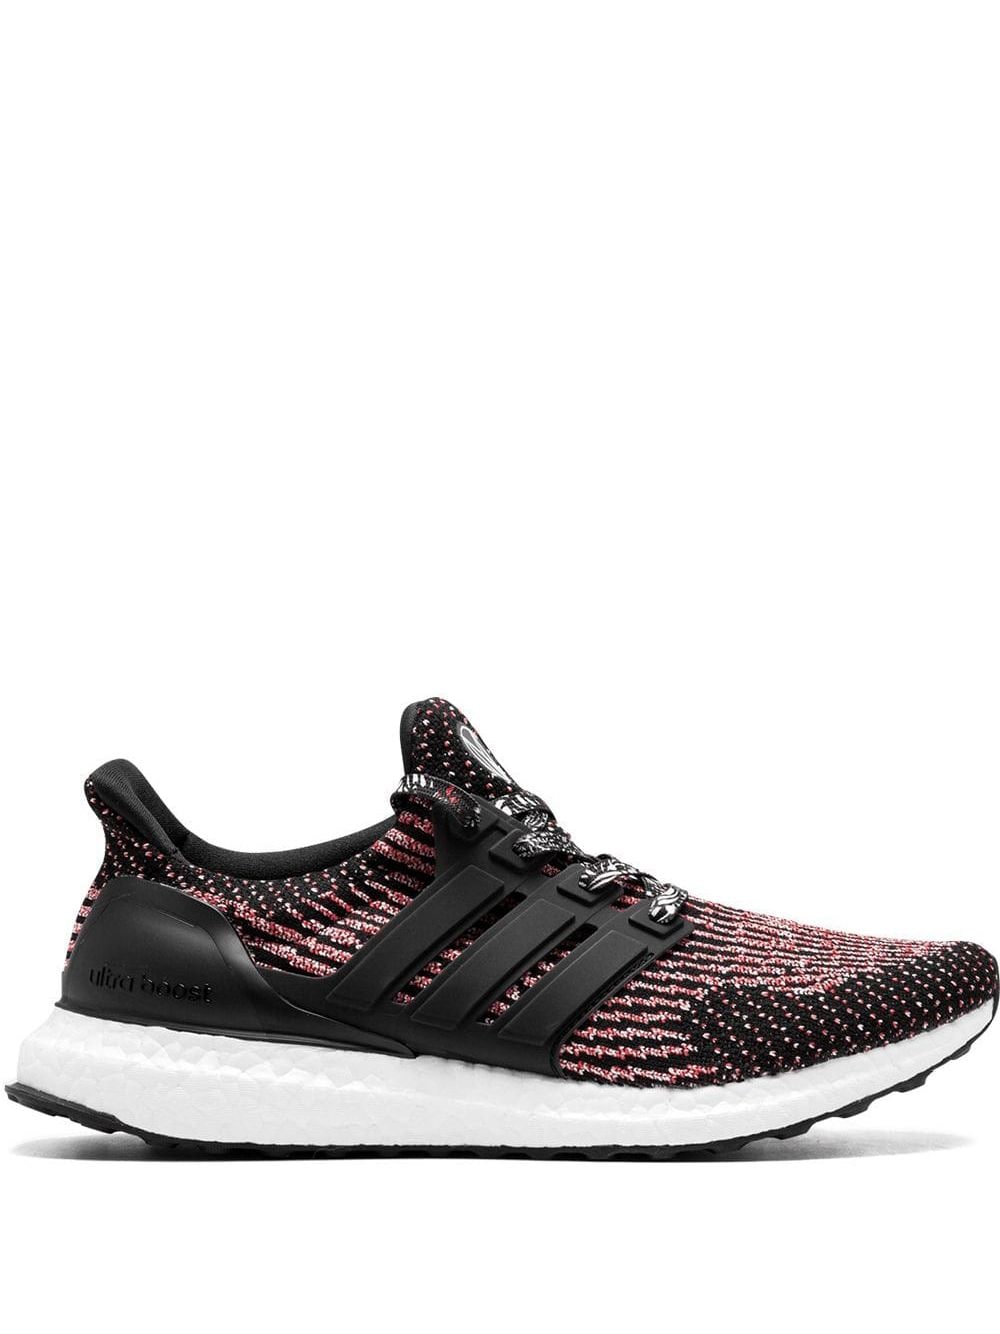 adidas Ultraboost "Chinese New Year" sneakers - Black von adidas